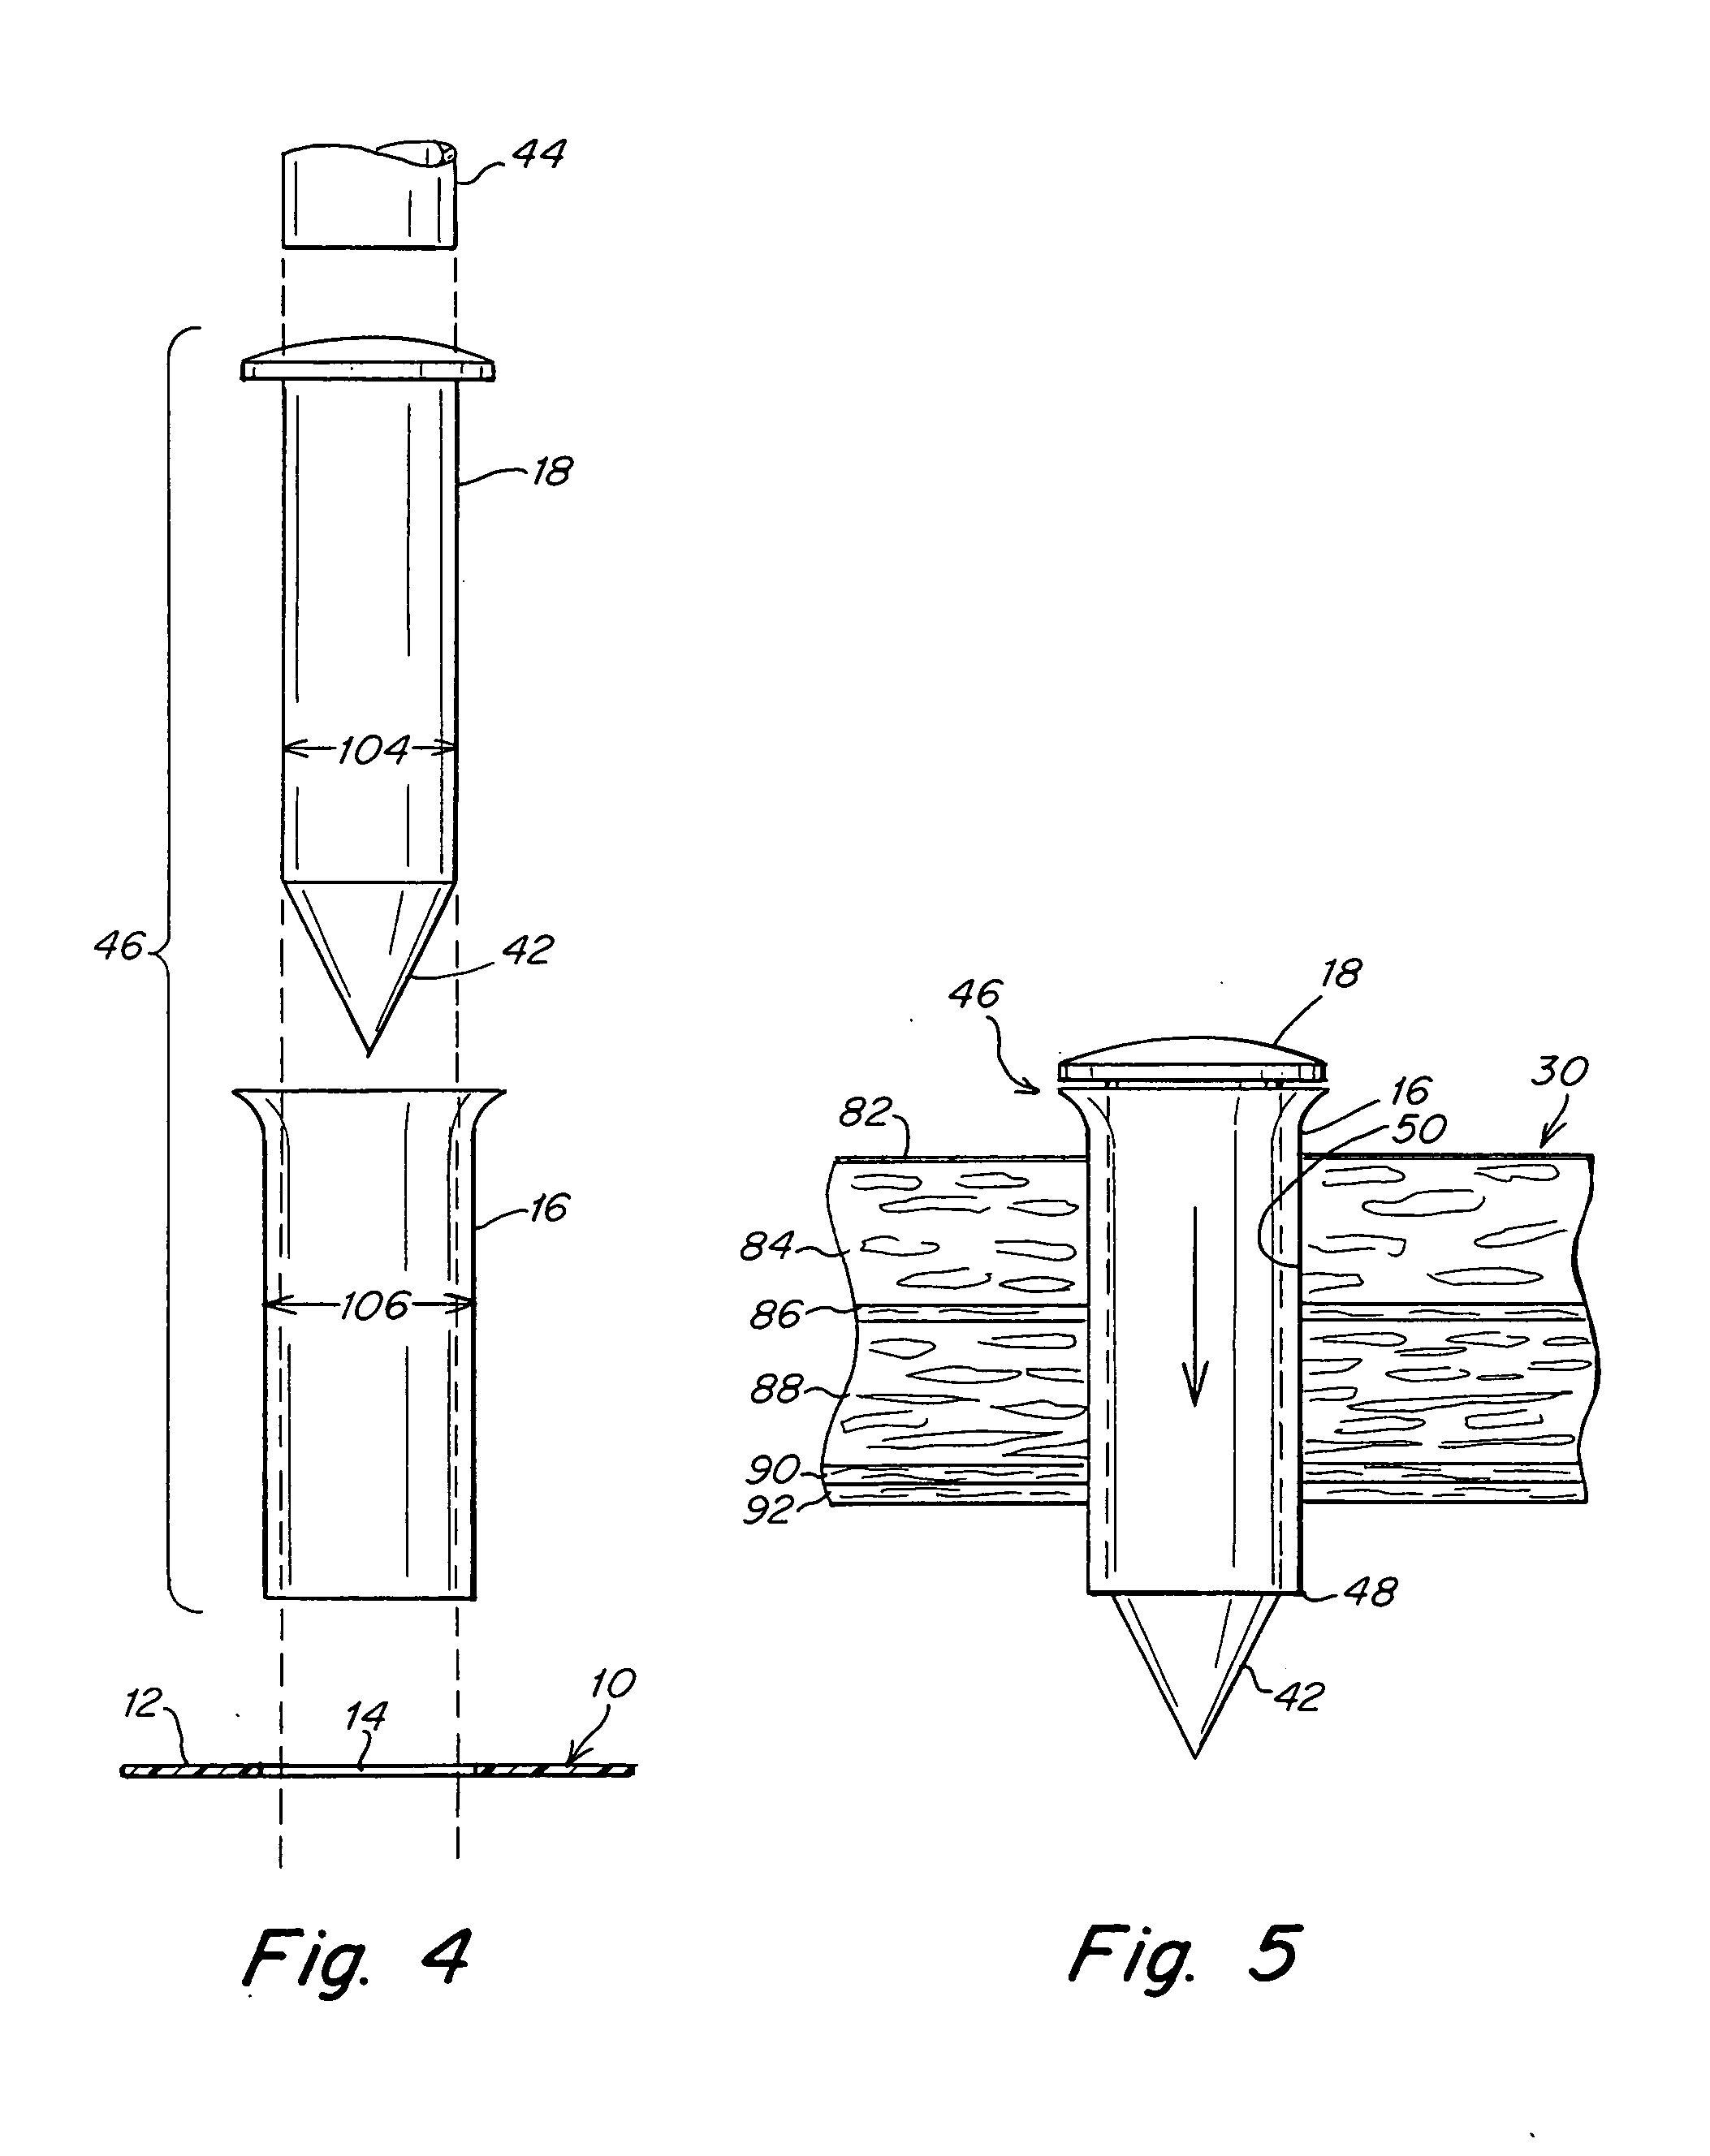 Implantable prosthesis and method of use